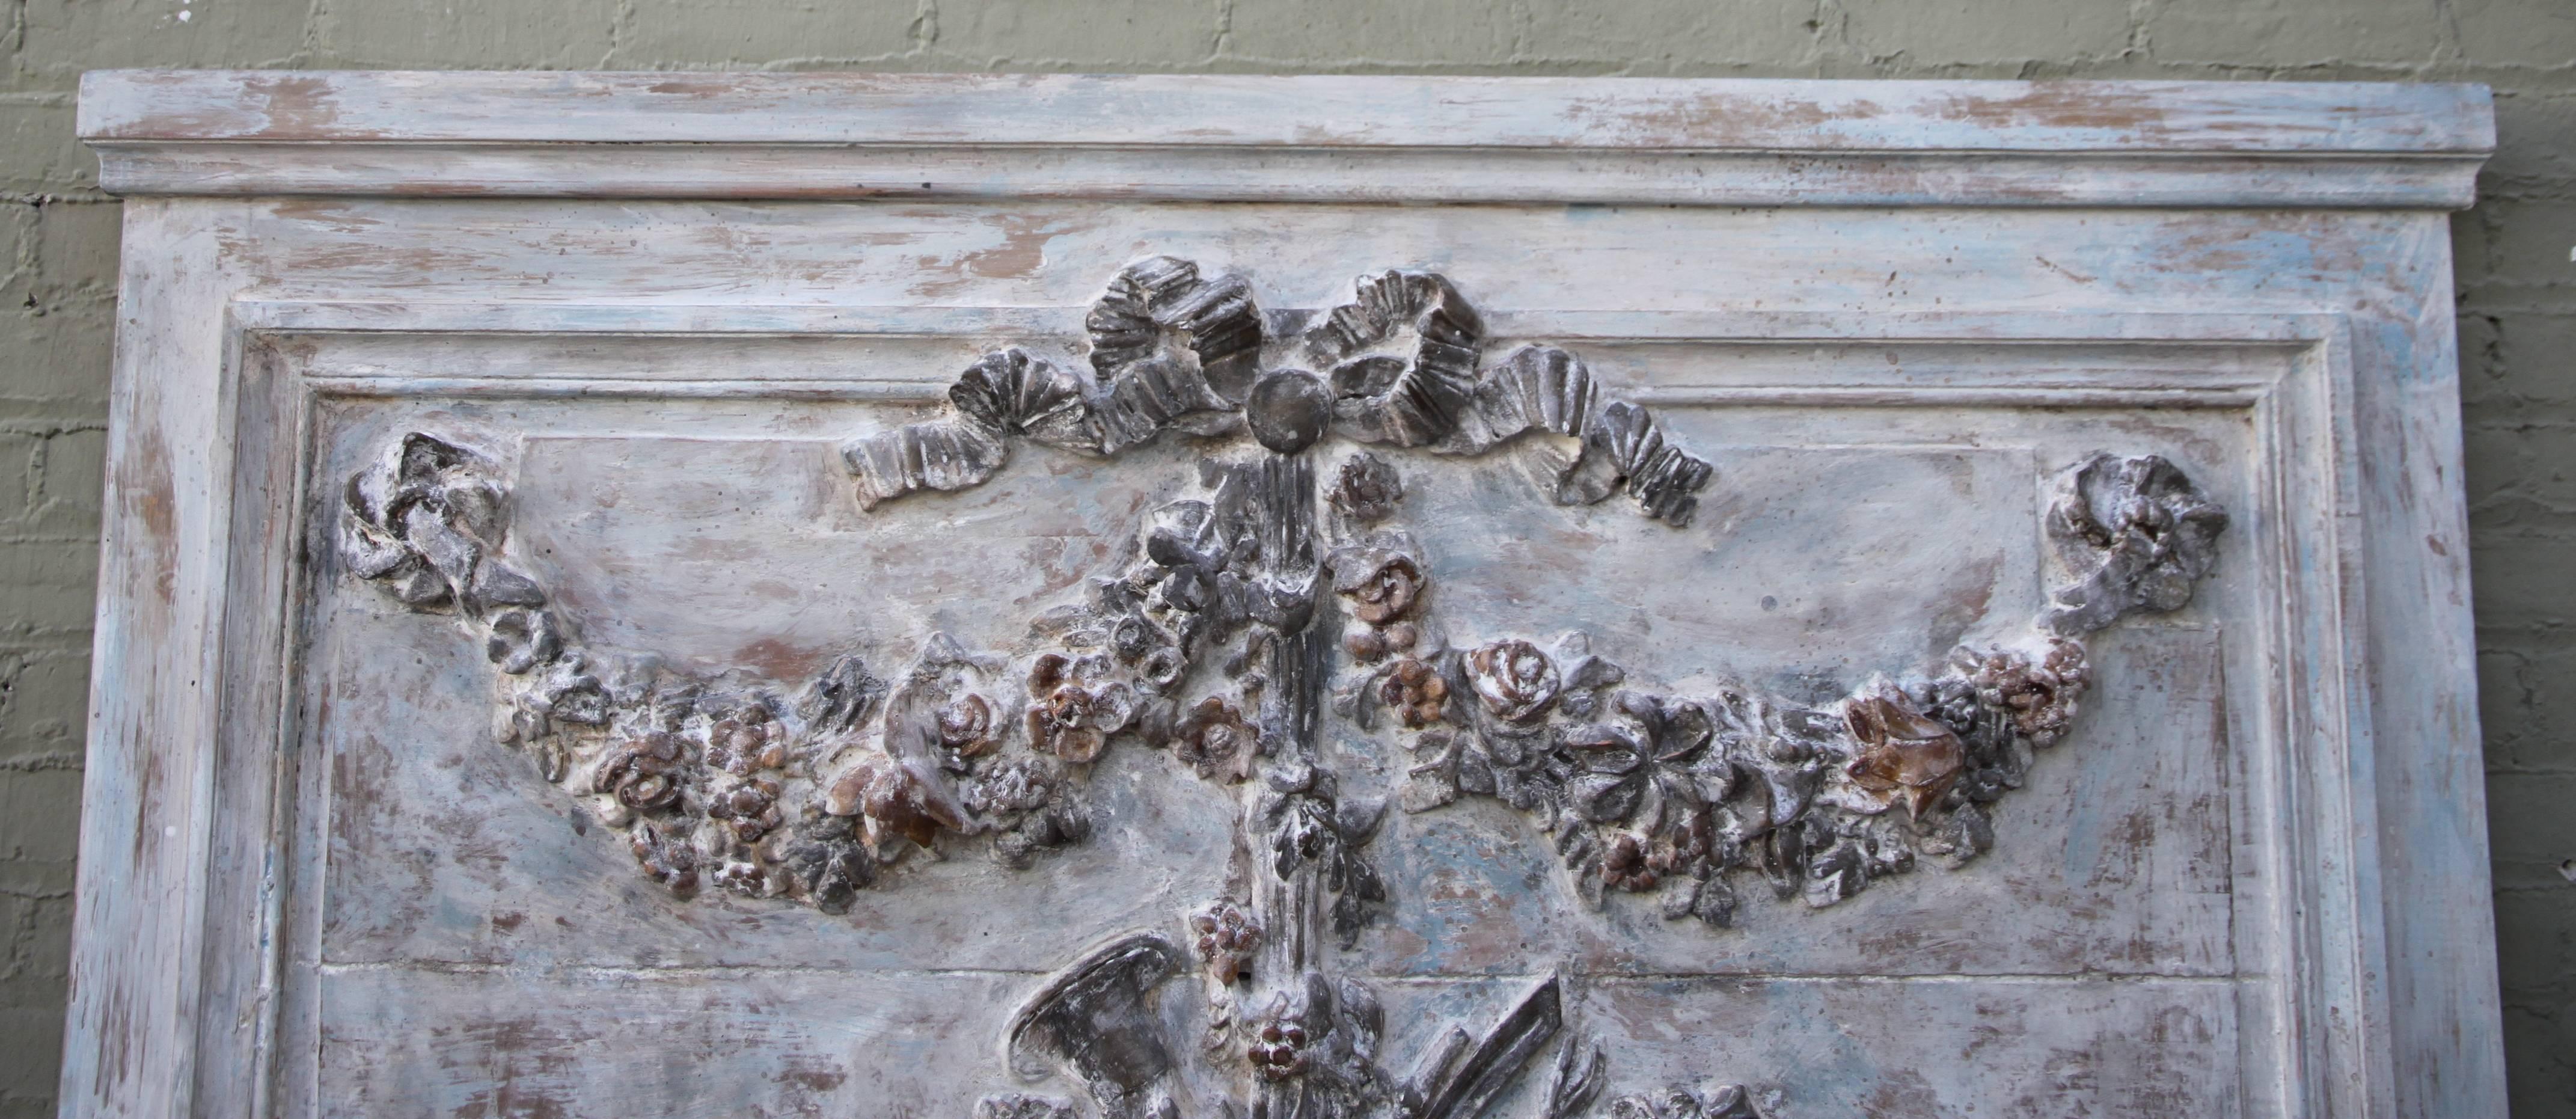 French carved painted Rococo style panel with floral garlands and musical instruments. It could be upholstered into a beautiful headboard or used as a decorative panel.